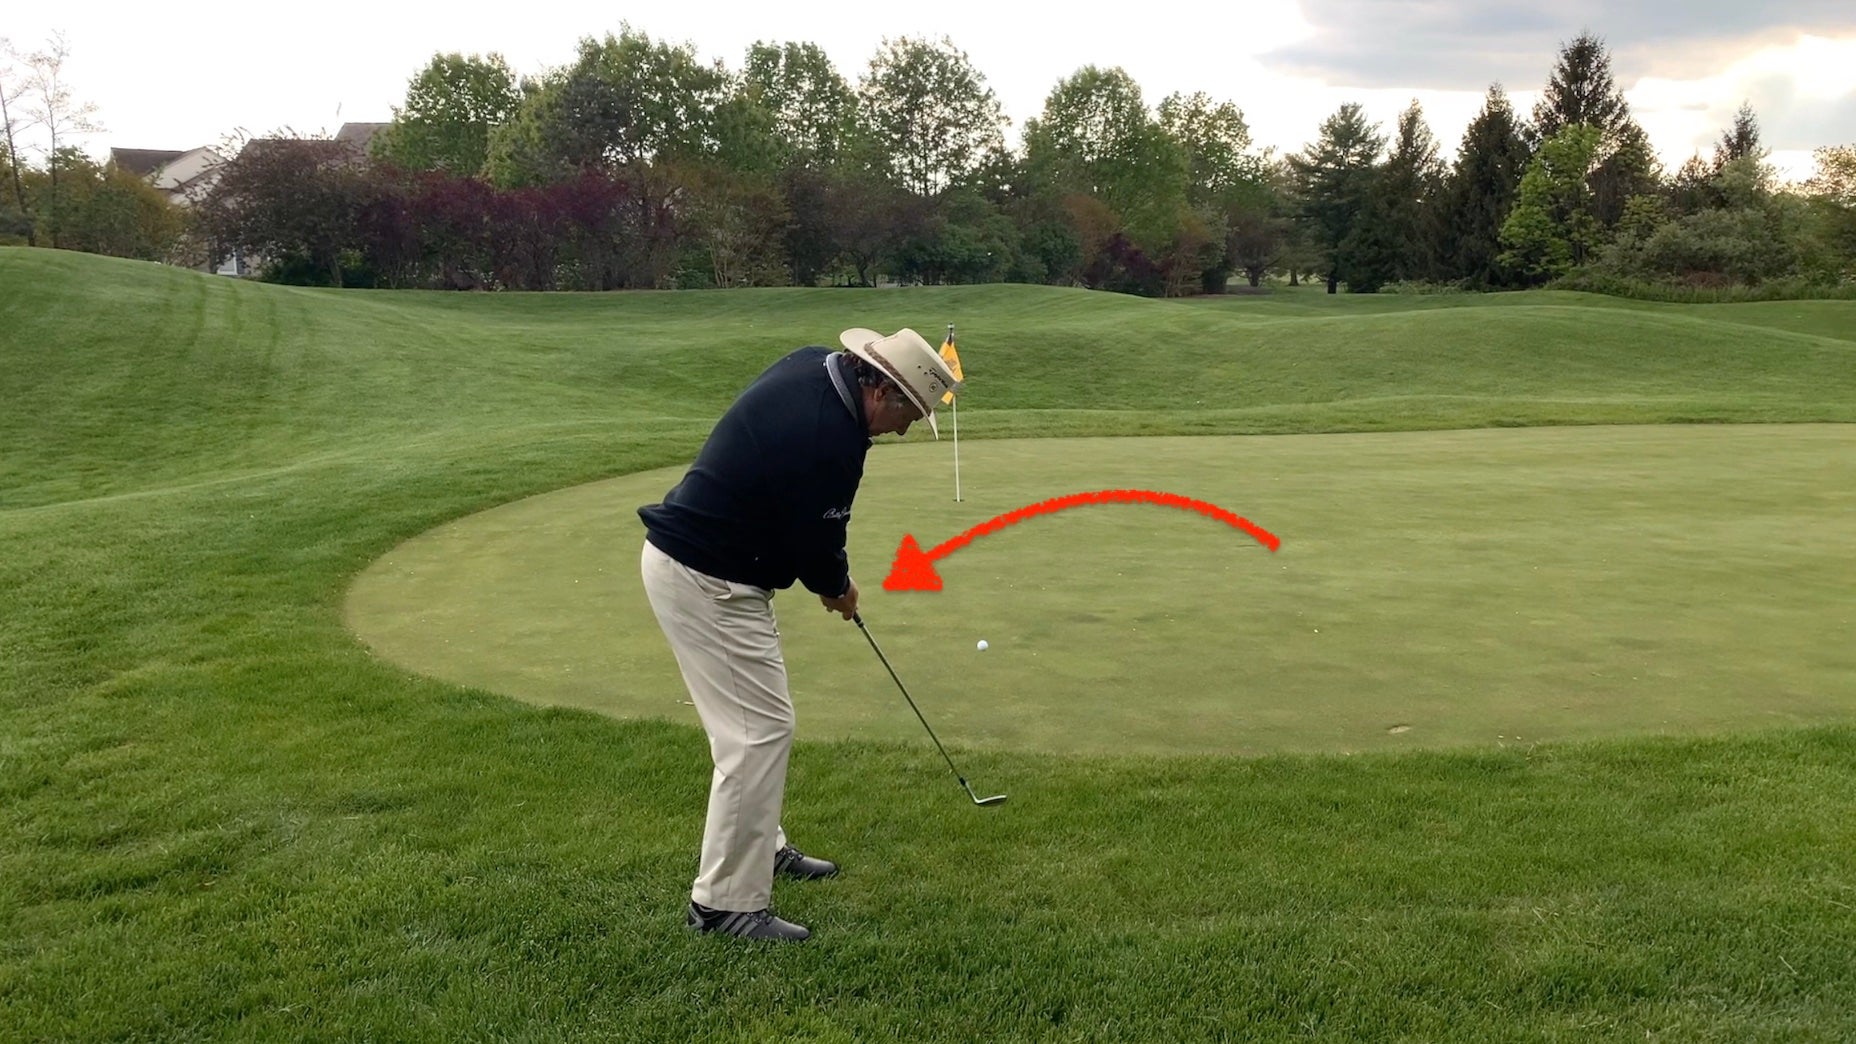 Sean Foley: Fixing A Slice, How To